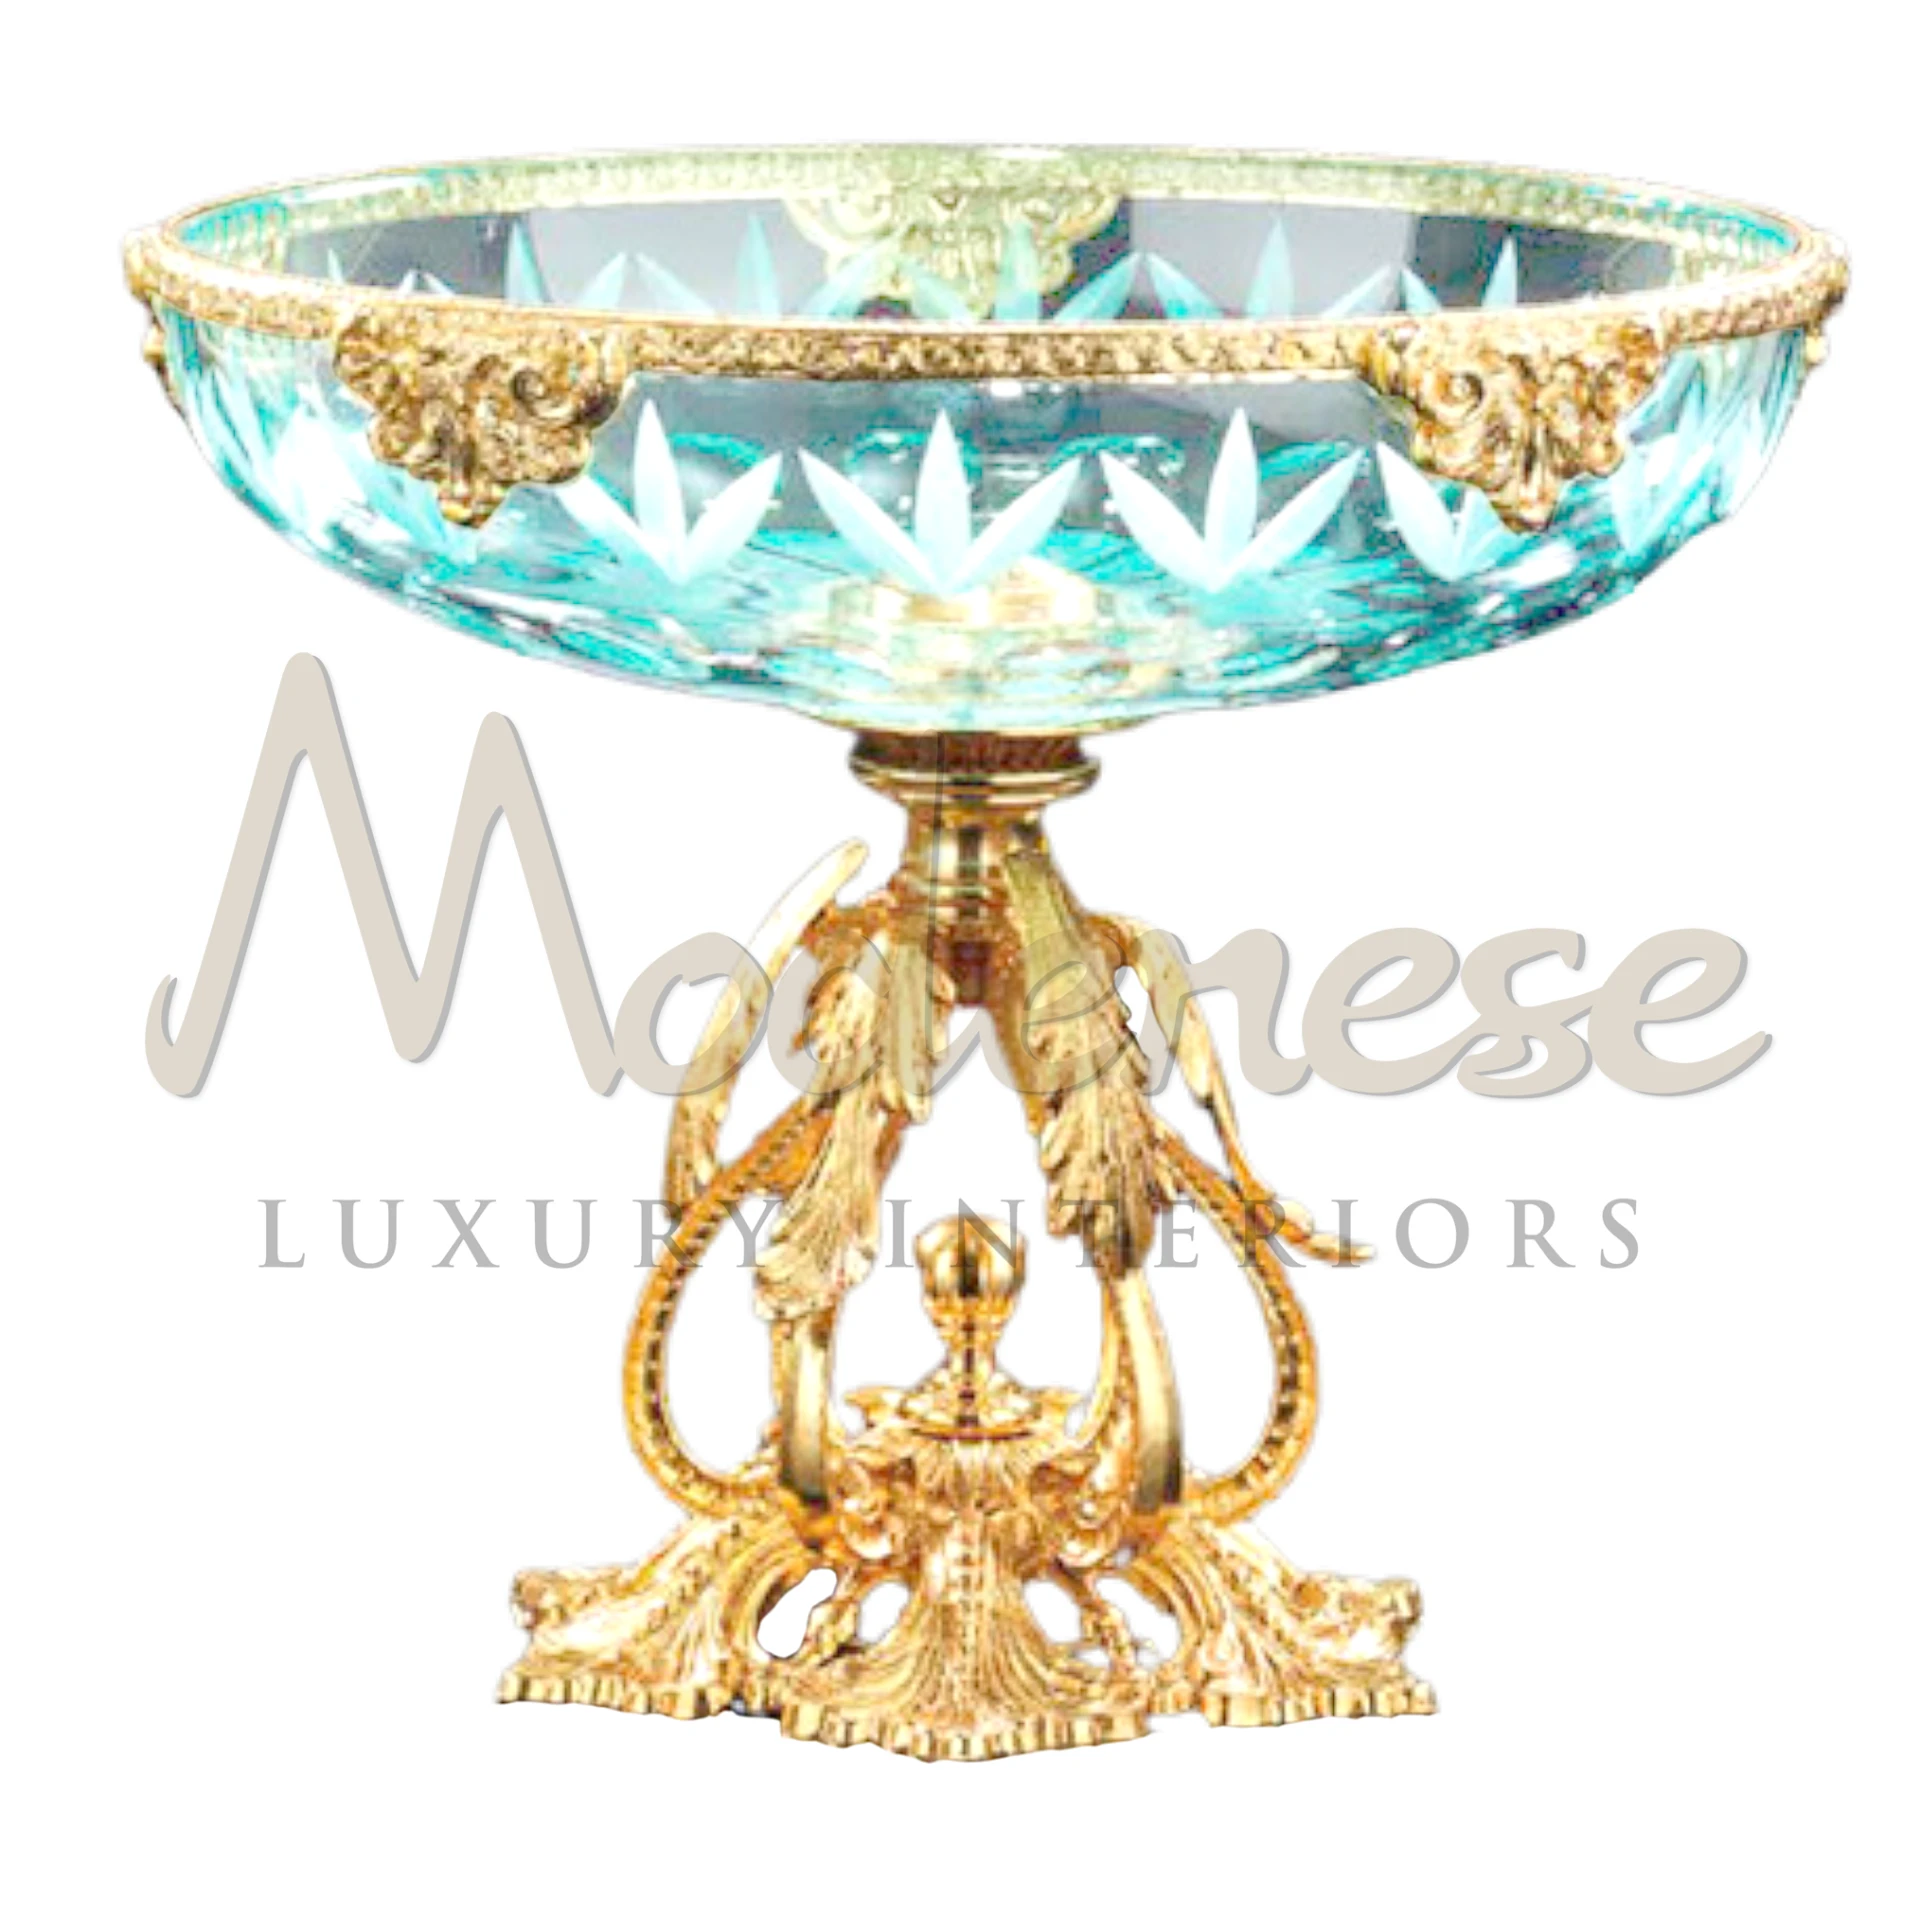 Elegant Classical Pedestal Turquoise Bowl, ideal for luxury vase collectors and interior designers, melding classic and baroque styles in high-end interiors.






